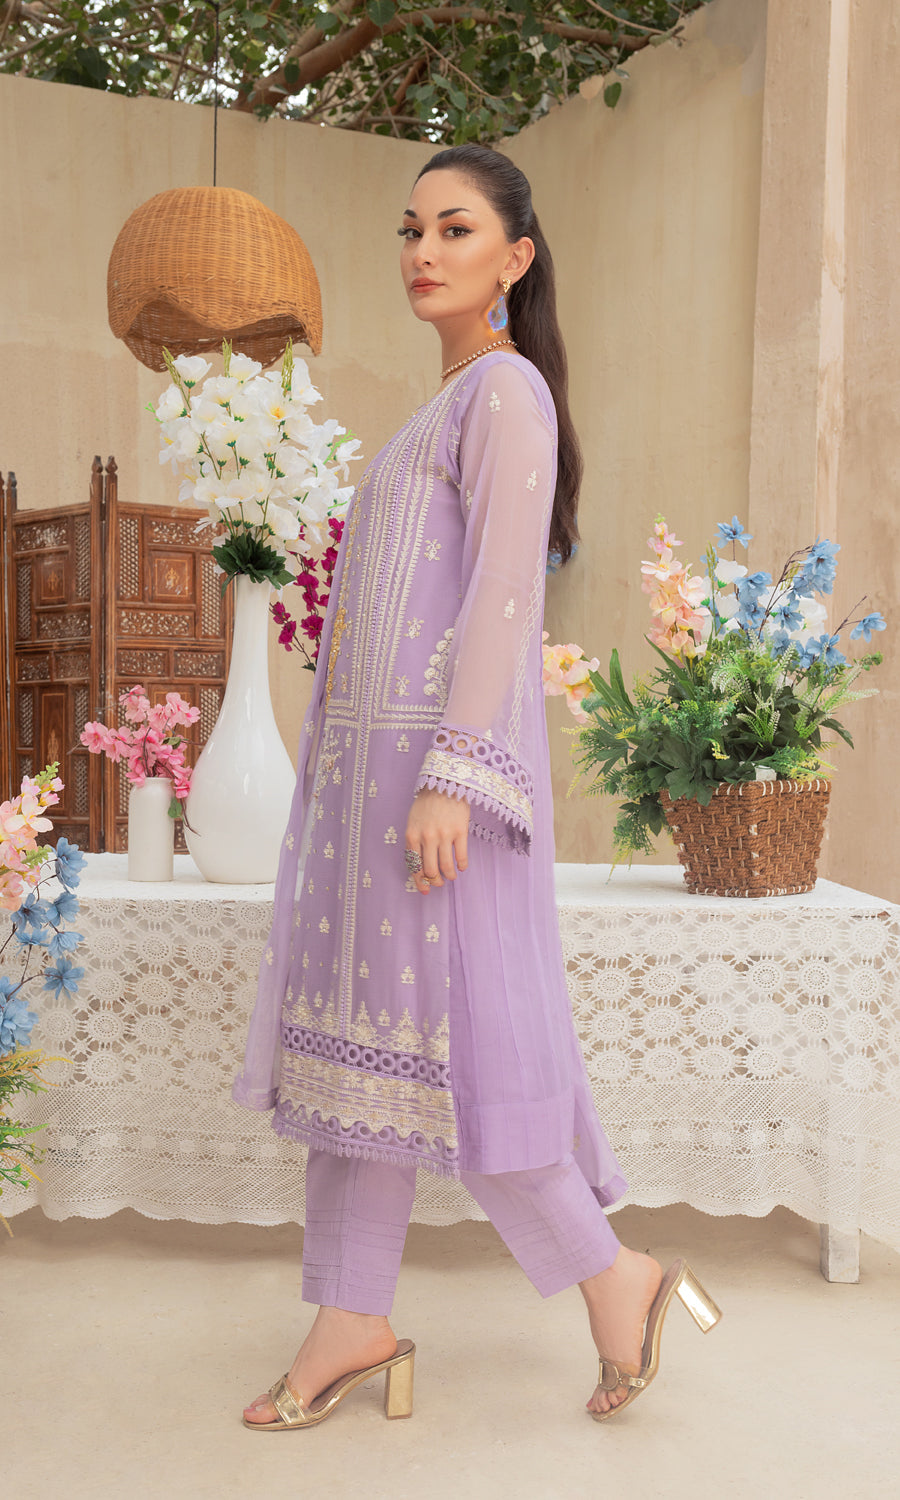 Shamooz. Mushq Volume 3. Step into a world of timeless elegance with this breathtaking vibrant color and embrodiery work on the front and side panel that enhances a pop of color and elevate the design.The delicately hand-embellished with every detail of this outfit exudes sophistication and refinement.